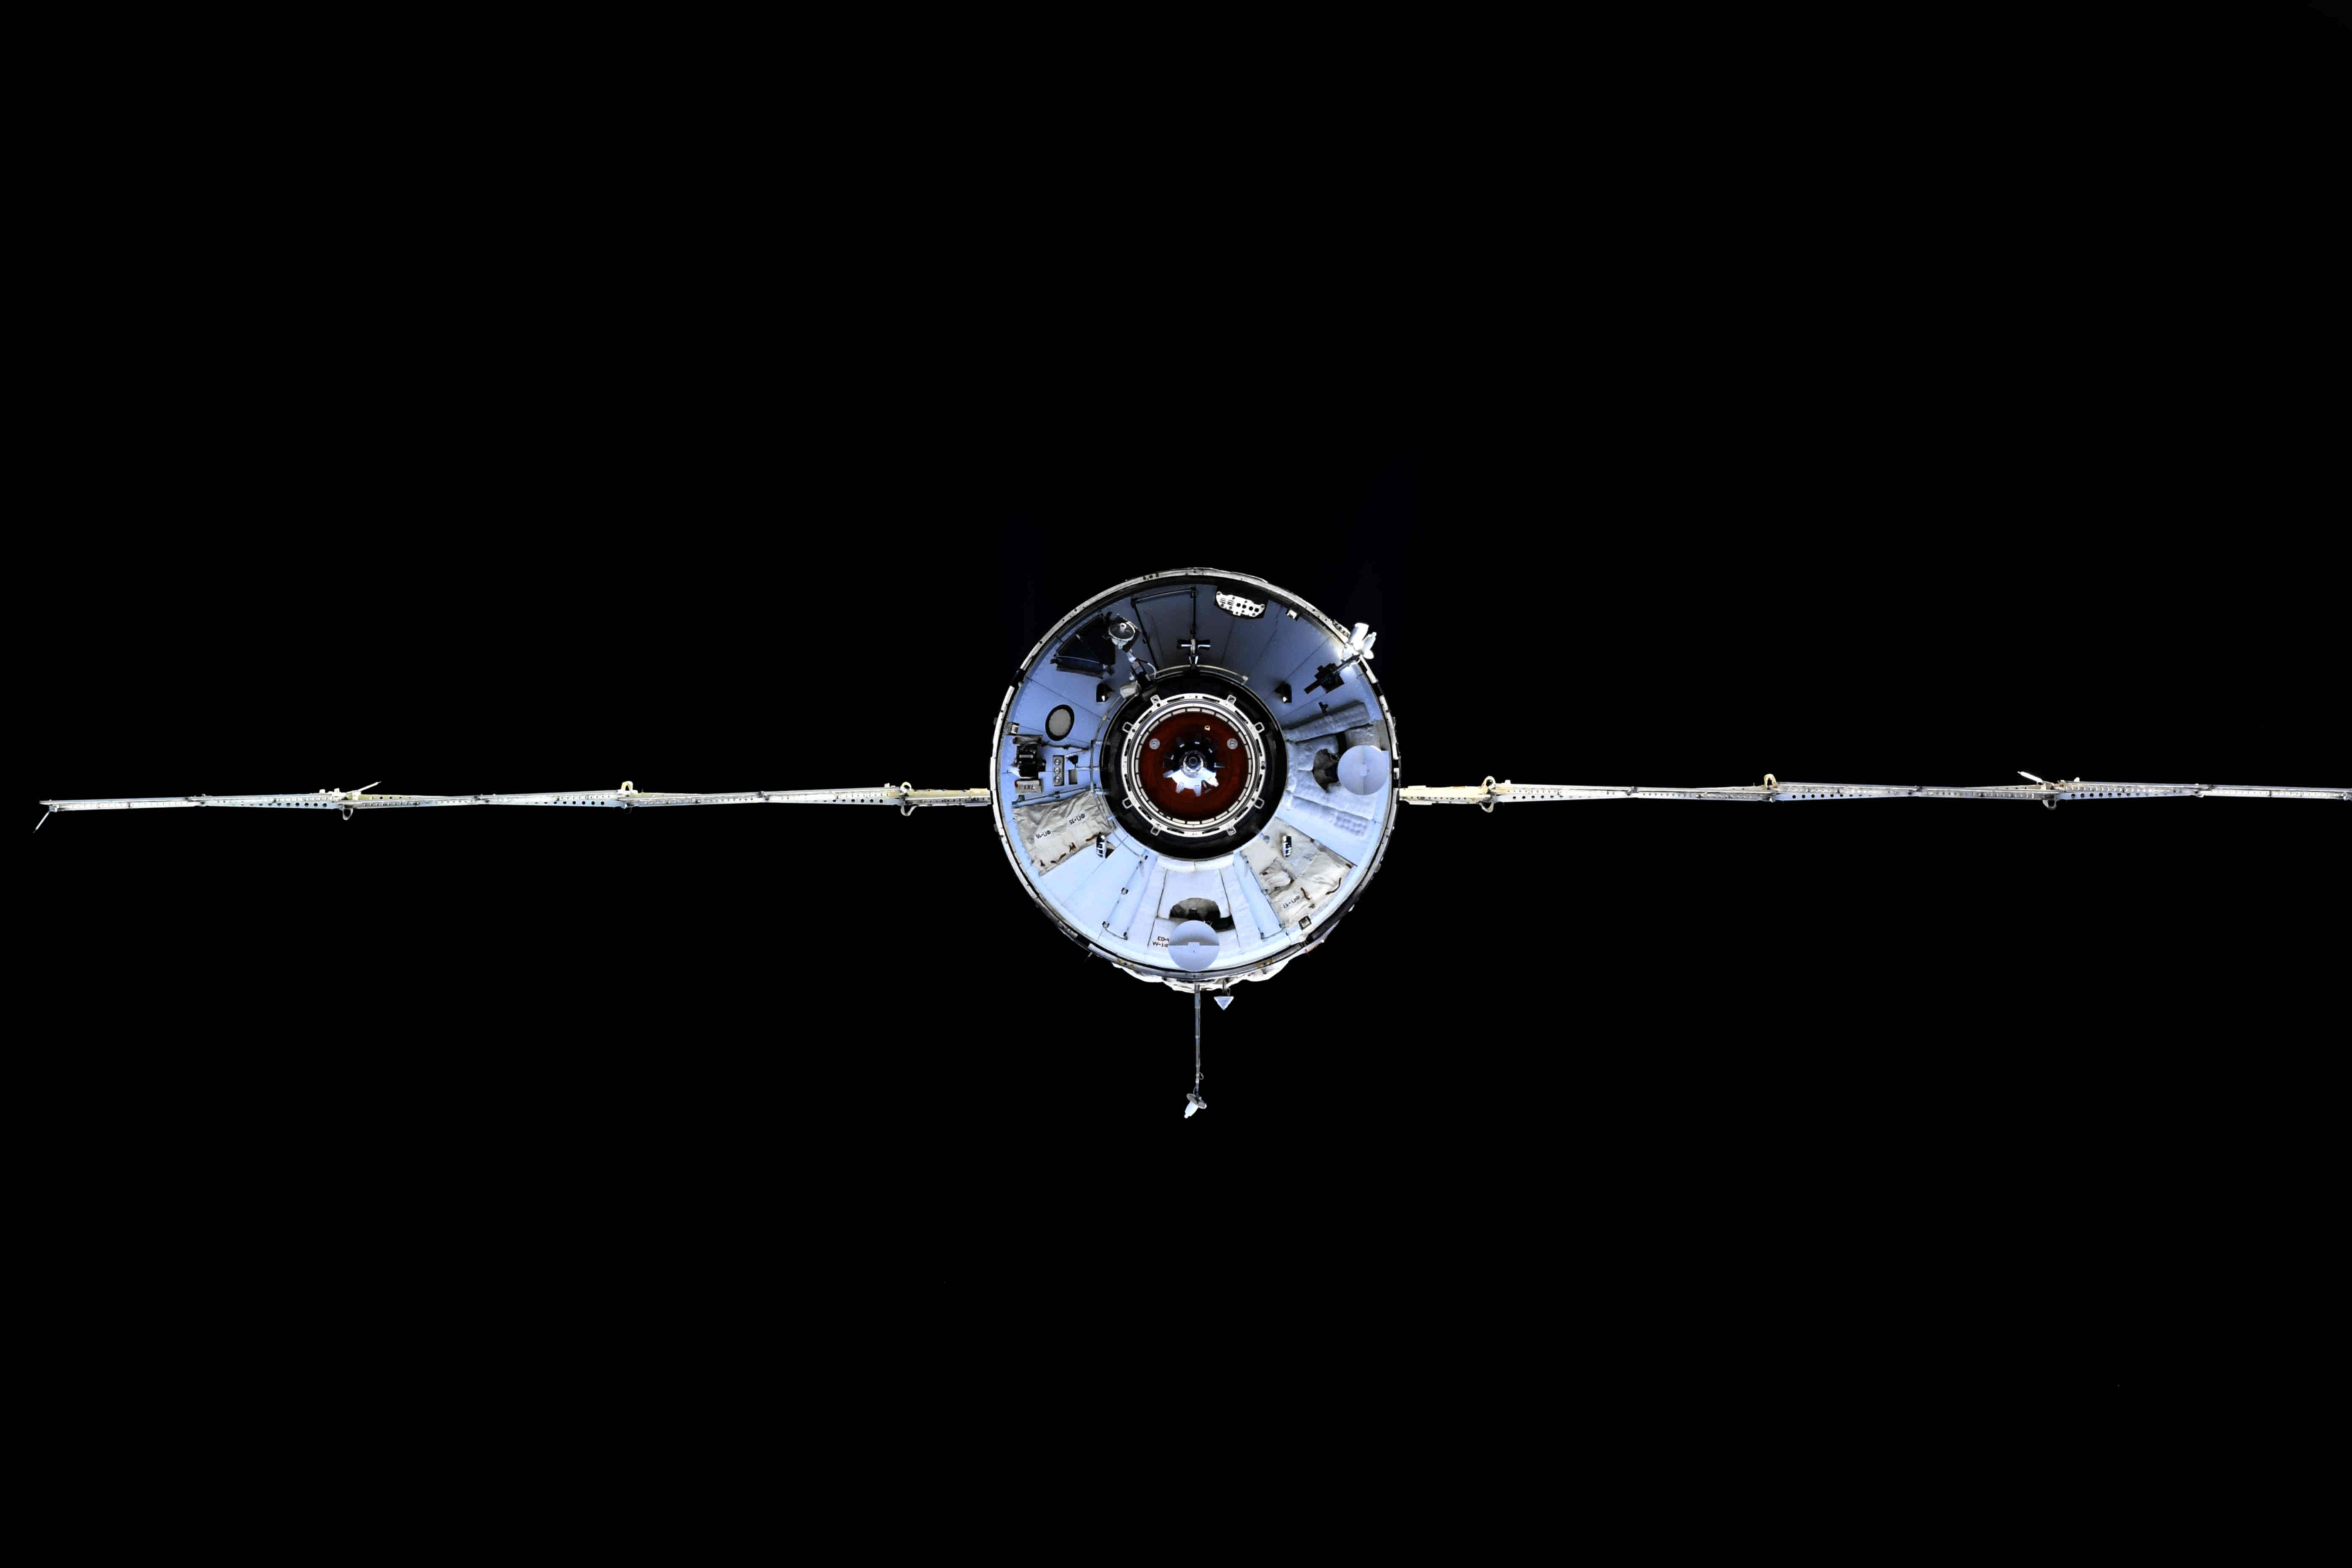 The Nauka module prior to docking with the ISS on Thursday 